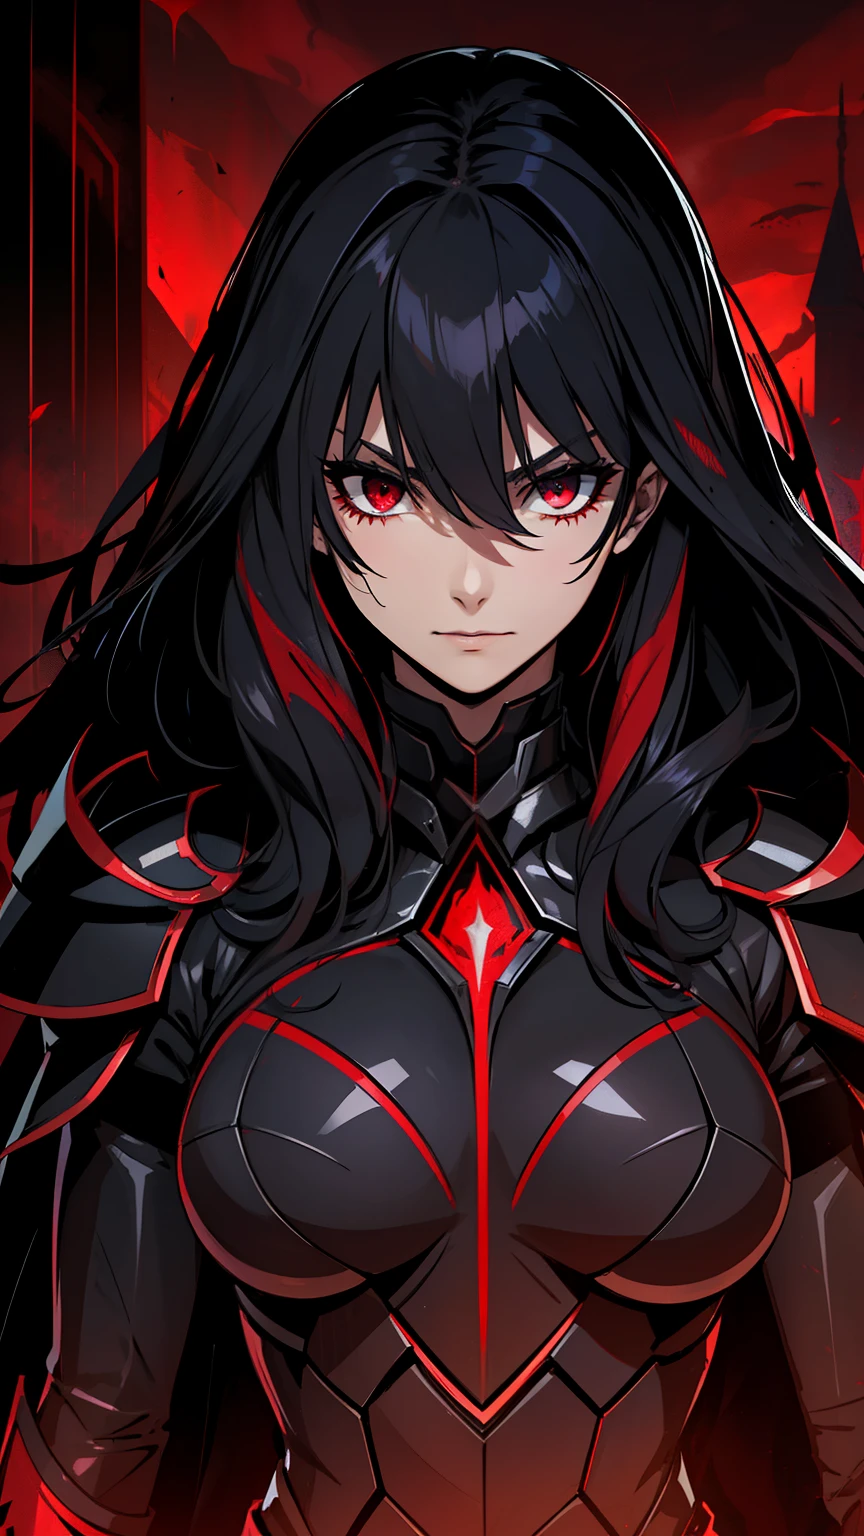 (high-quality, breathtaking),(expressive eyes, perfect face) 1female, girl , solo, young adult, long hair length, wavy curly hair, soft wave, black hair color, red highlights in hair, deep red eye color, background, music, smug expression, smirk, mature, dominant, haunting red background, armor, onyx black armor with red trim, midnight dark armor with red cracks engraved in the exterior, saber alter, alter saber fate stay night, corrupted theme, corrupted armor, red lines on armor, conquerer vibe, red markings on armor, slightly narrow eyes, evil queen, narrow beautiful eyes, queen chess piece, beautiful hair, detailed eyes
